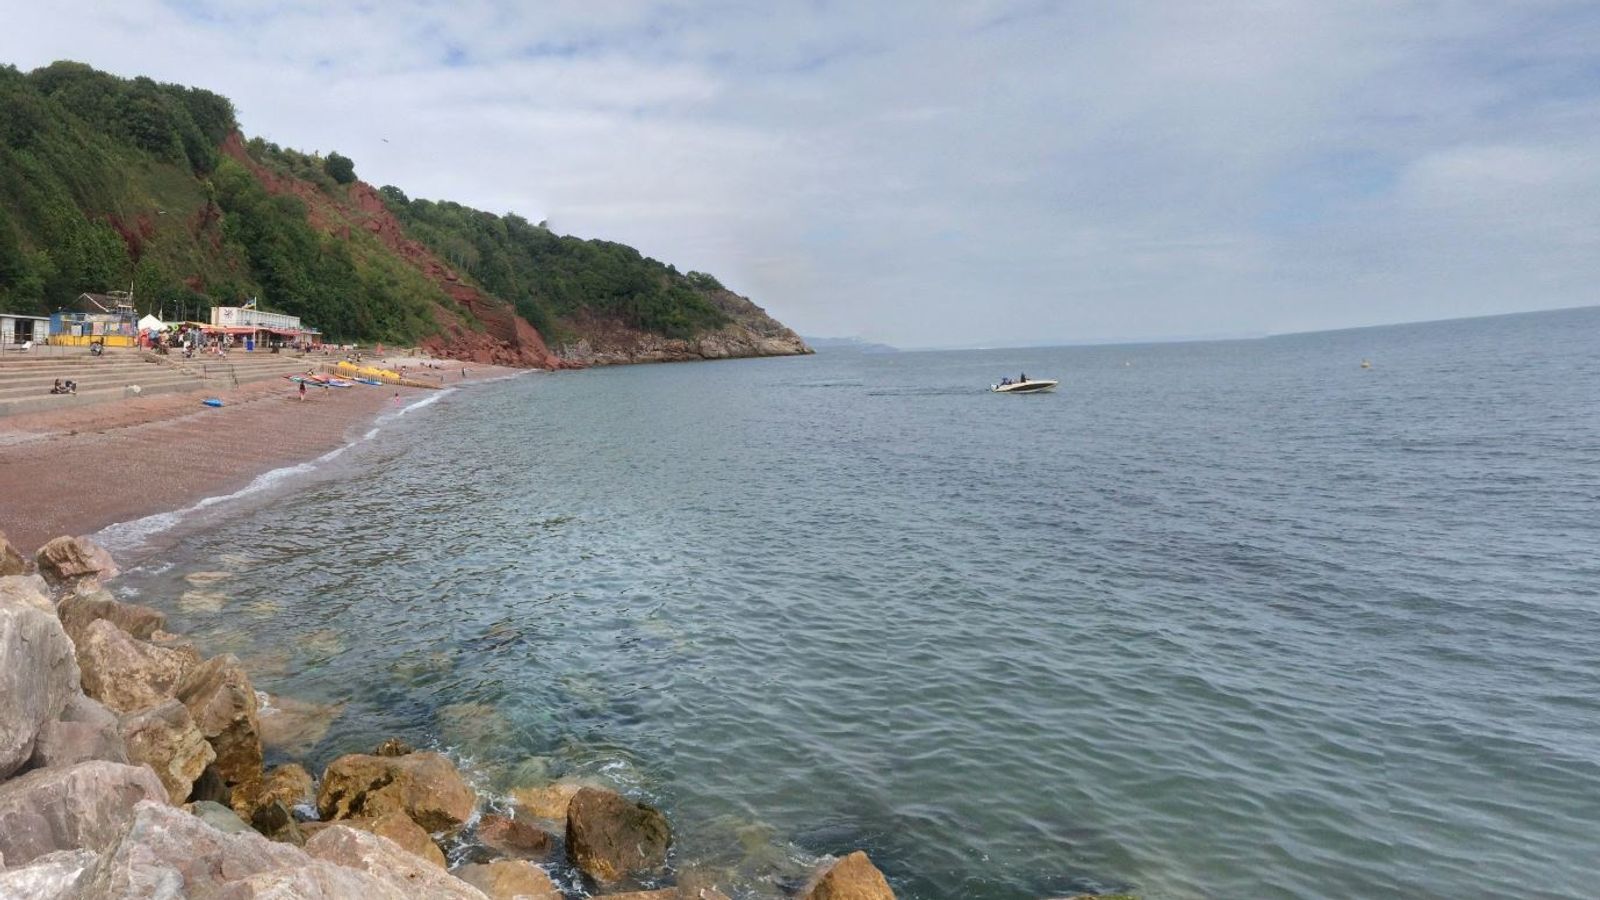 Two men in 20s die after being pulled from sea off Devon coast